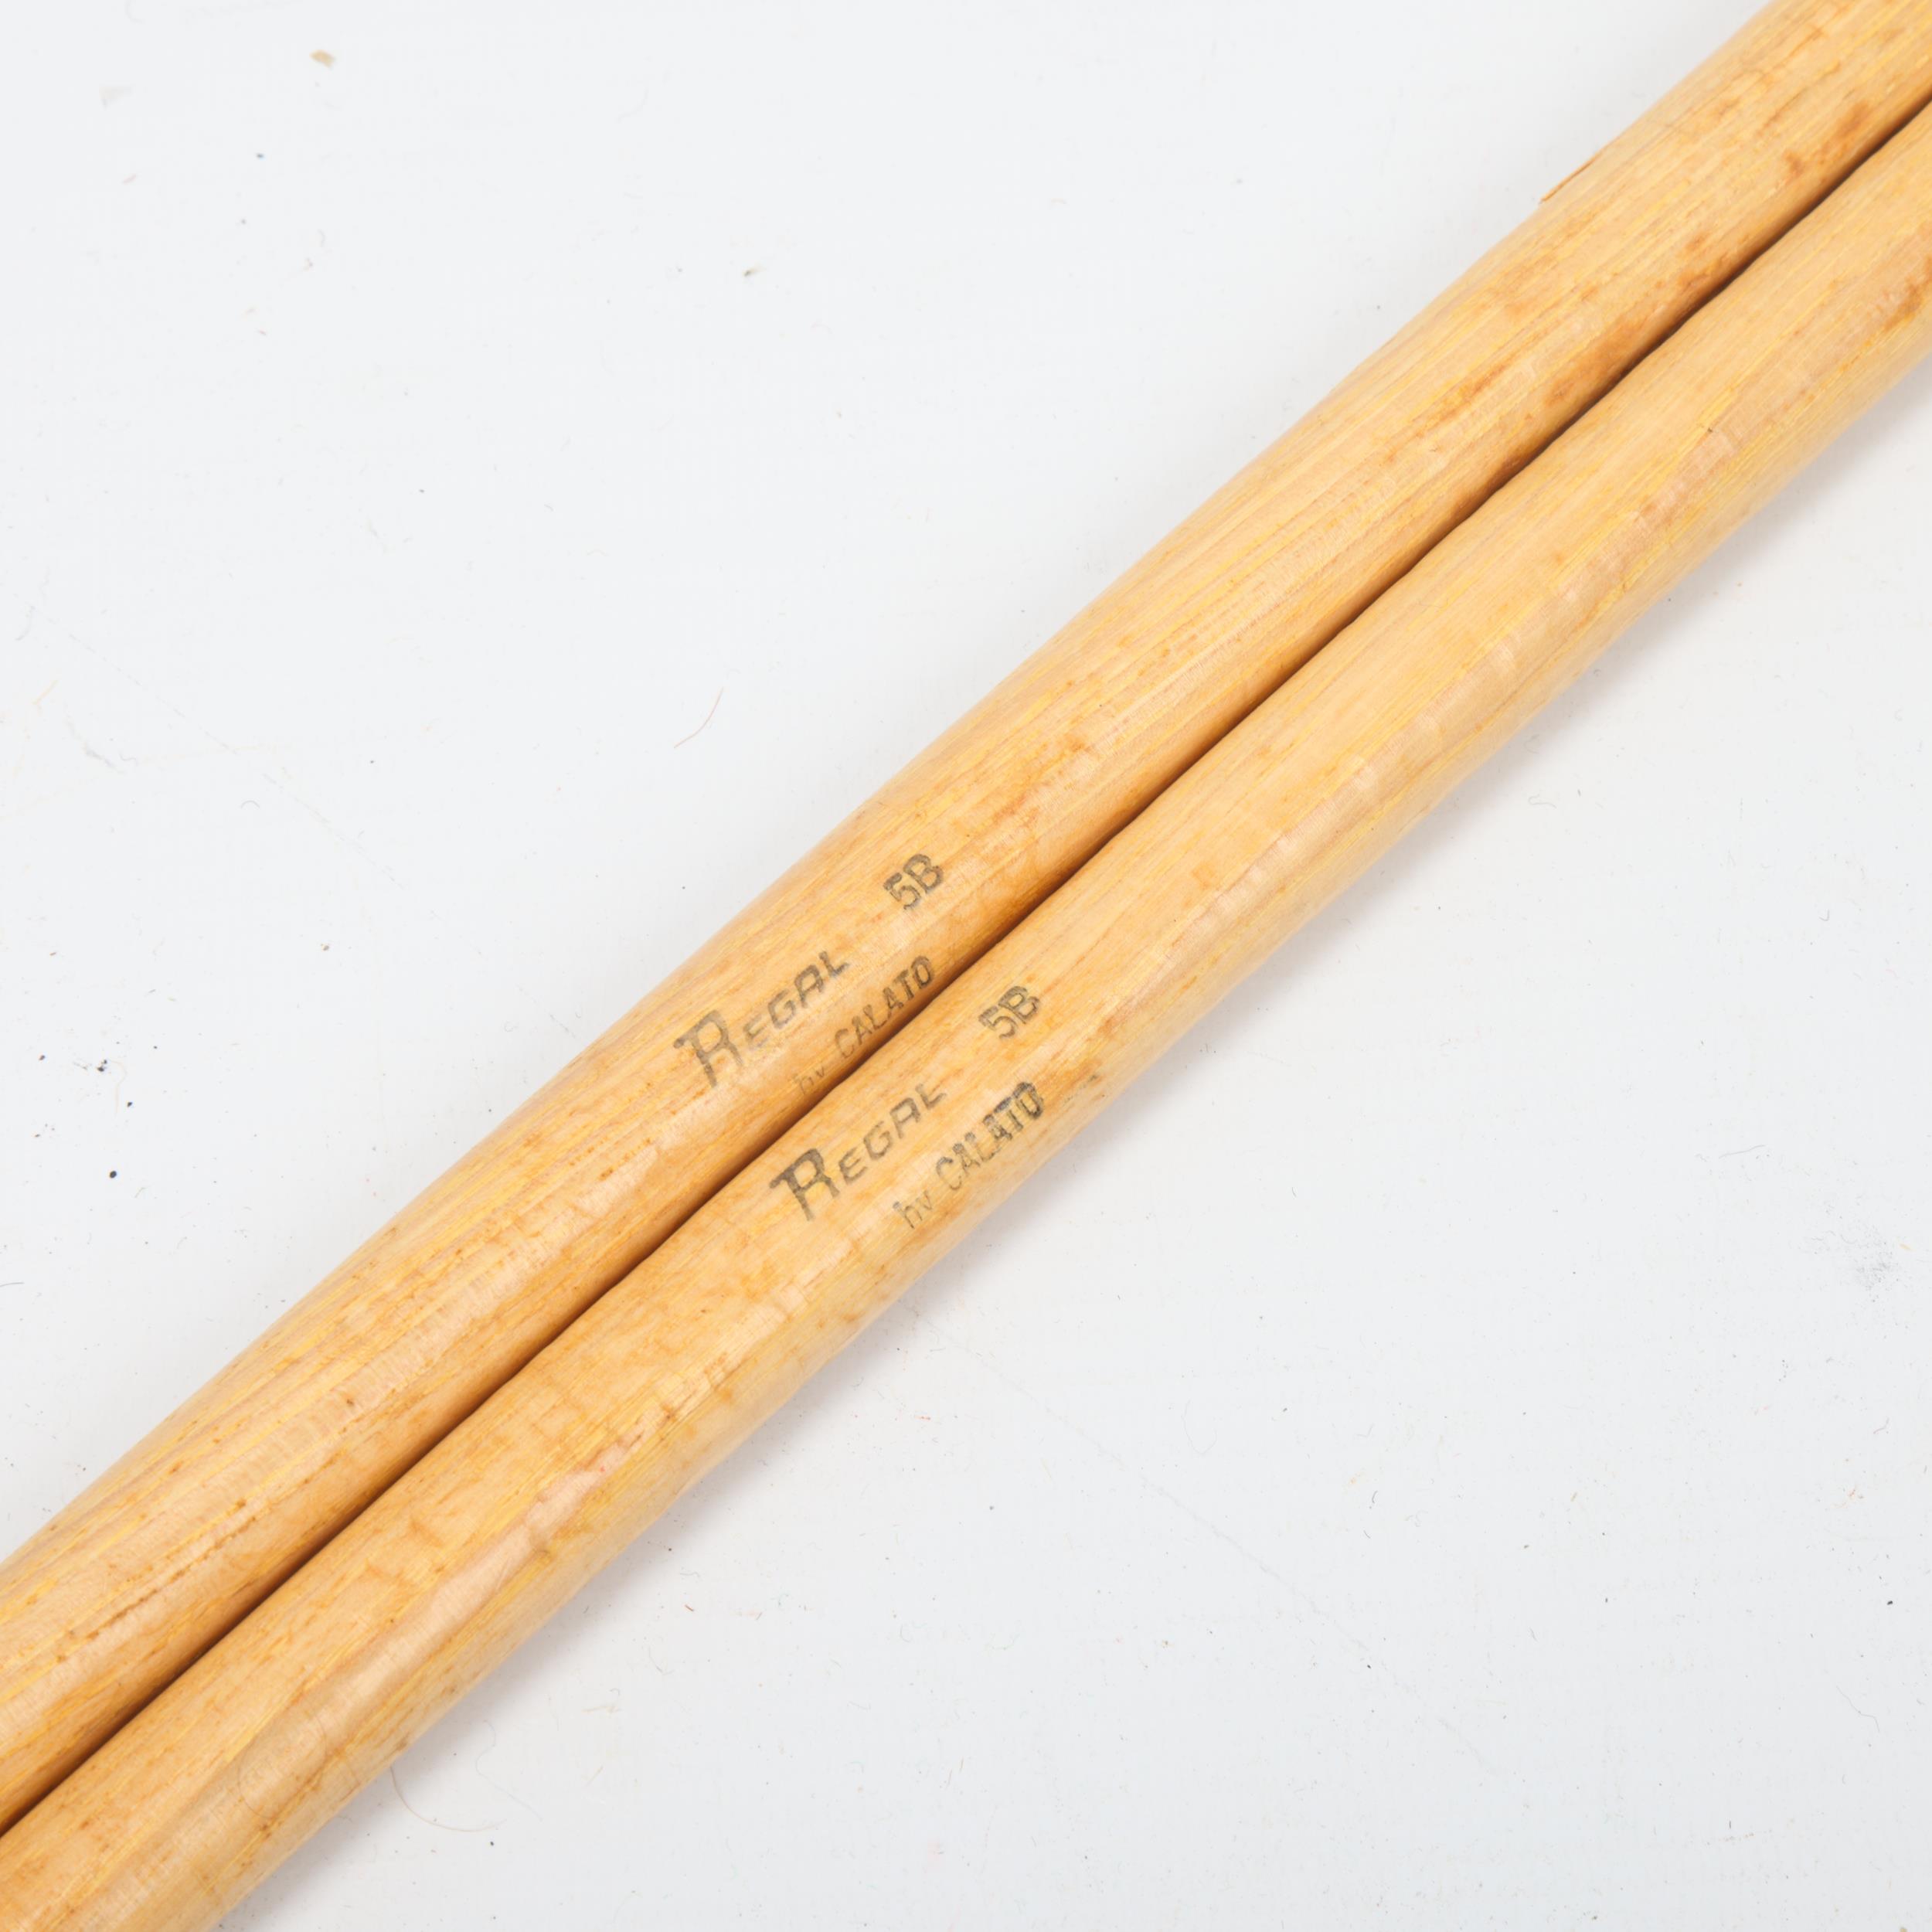 Two USED CALATO 'REGAL 5B' Hickory DRUMSTICKS belonging to MITCH MITCHELL. - Image 2 of 3